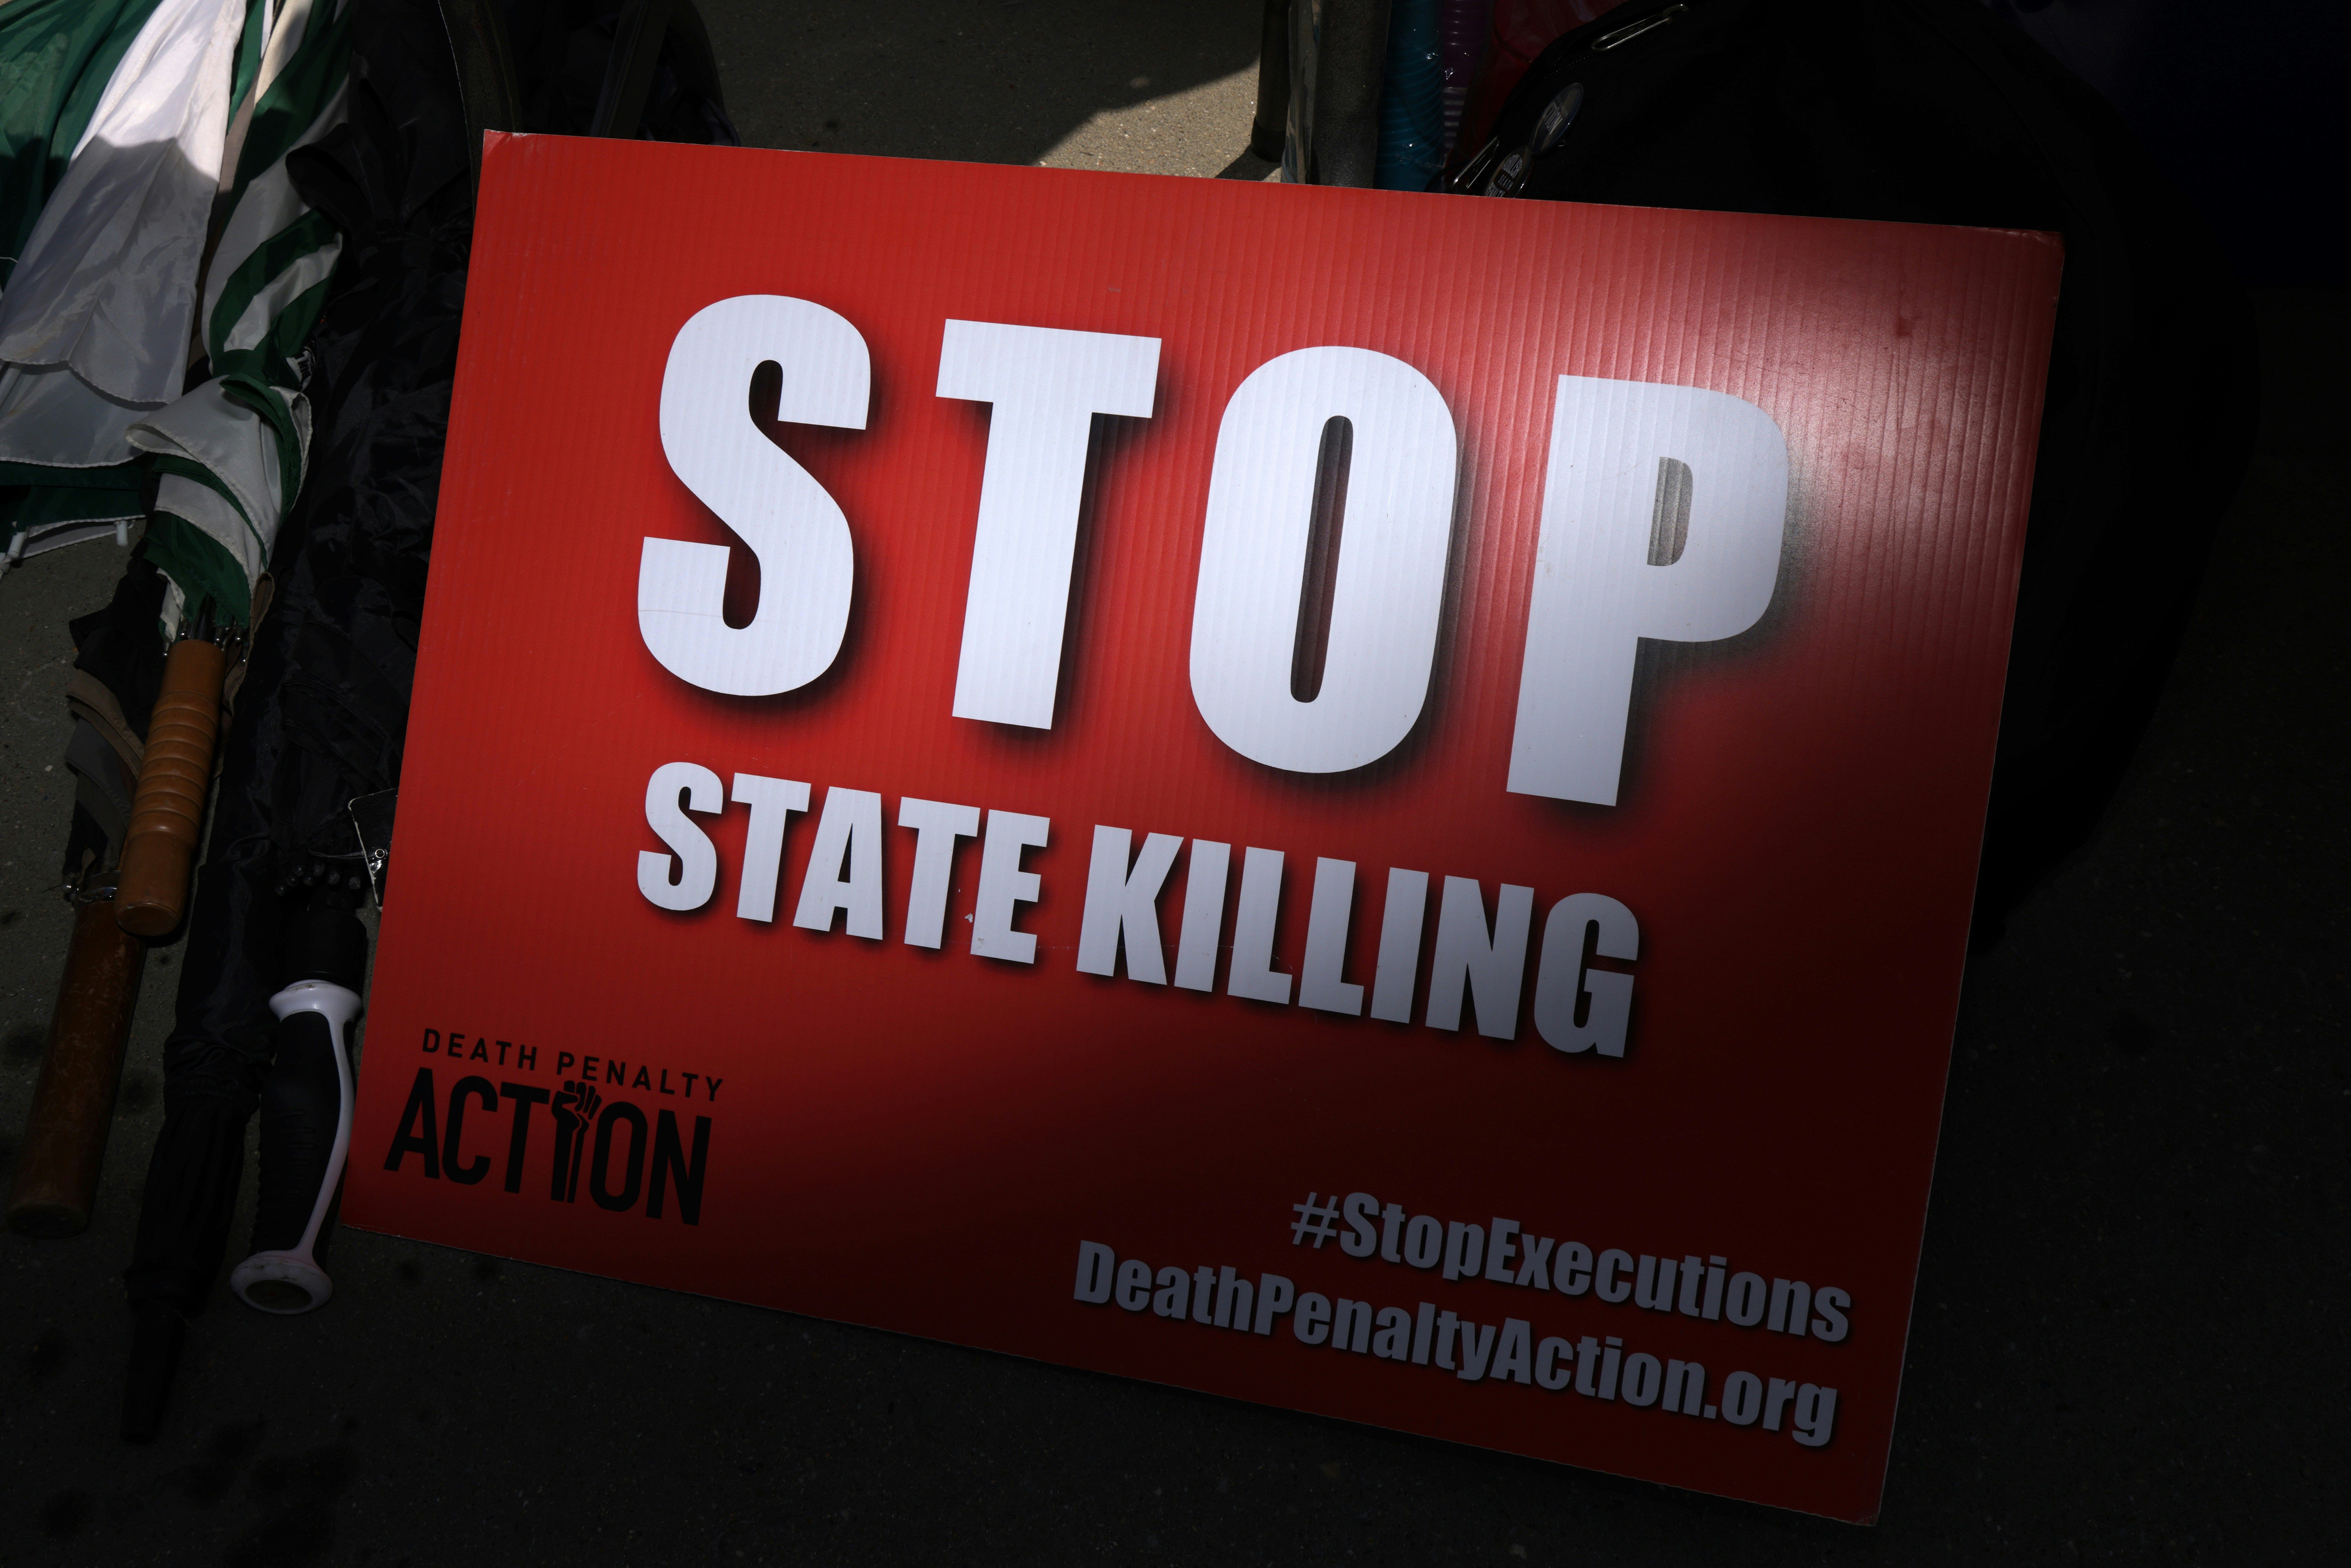 WASHINGTON, DC - on June 29:  A sign that reads "Stop State Killing" is seen during a vigil against the death penalty in front of the U.S. Supreme Court on June 29, 2021 in Washington, DC. The Death Penalty Action and The Abolitionist Action Committee are hosting daily vigils through July 2 to mark the anniversaries of "the historic 1972 Furman and 1976 Gregg Supreme Court decisions on the death penalty." (Photo by Alex Wong/Getty Images)